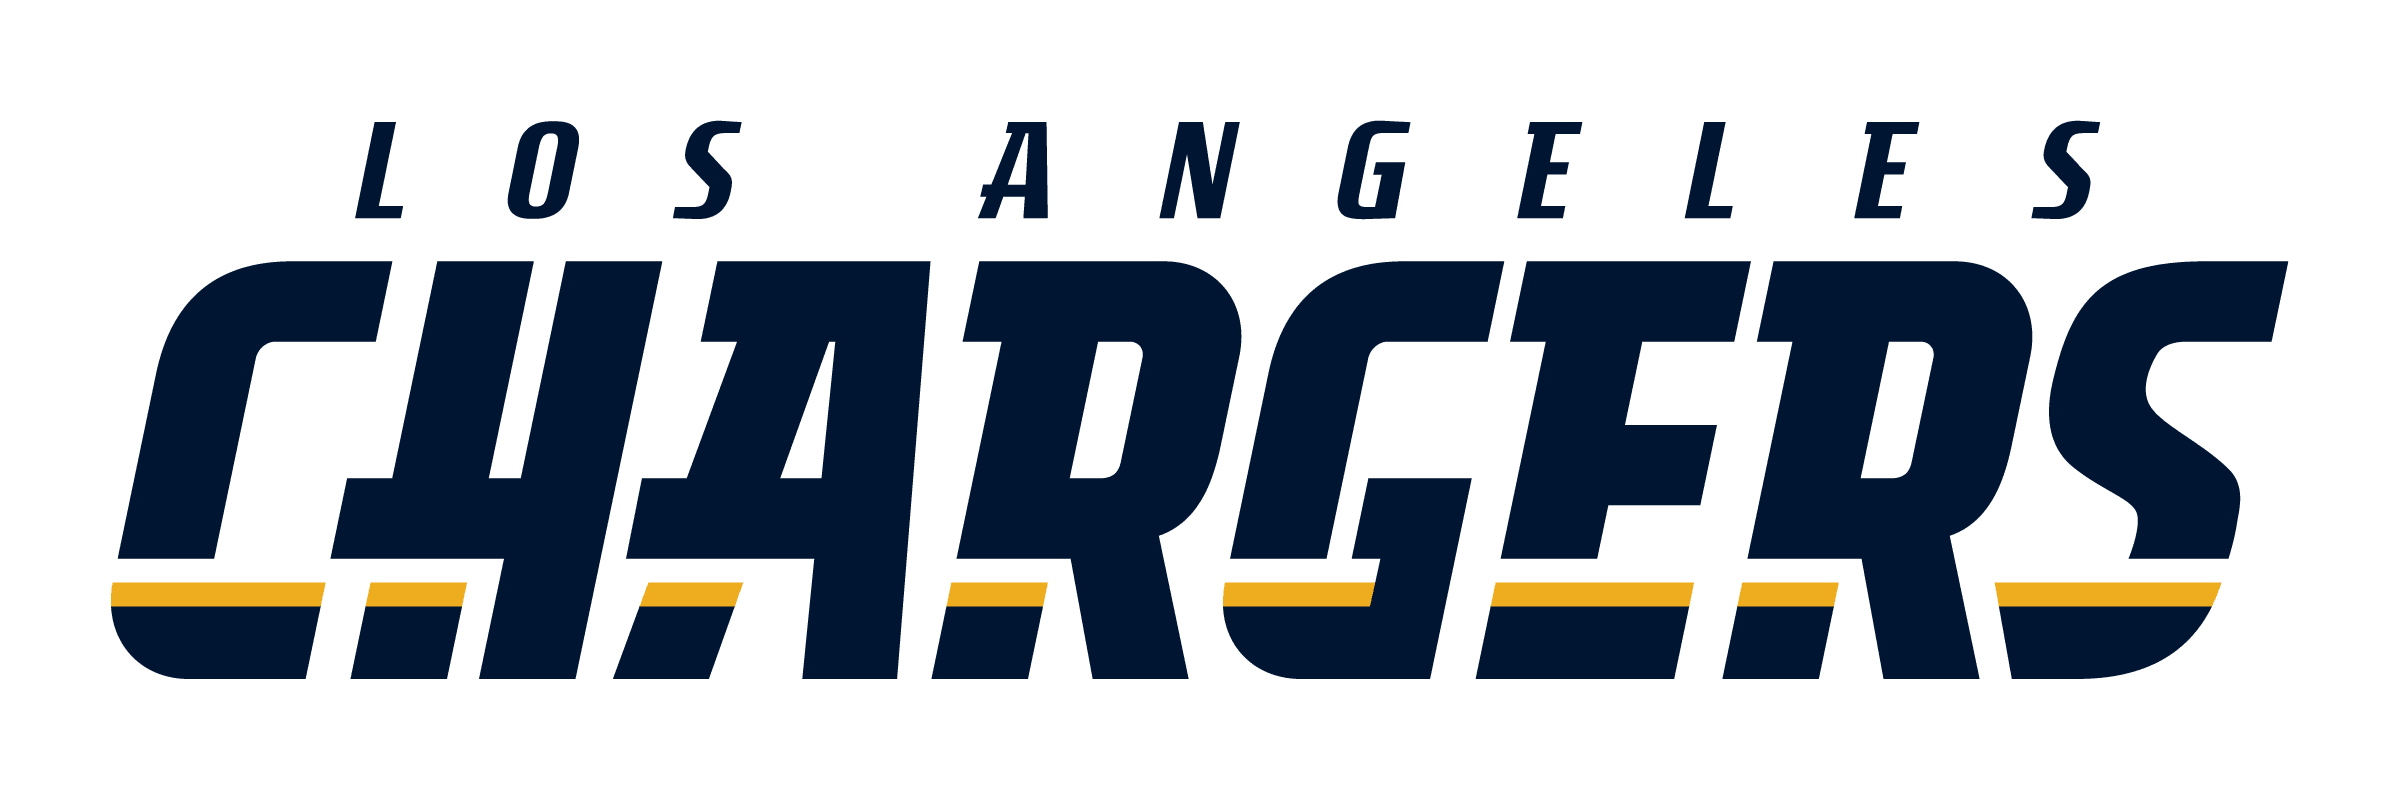 Angeles Los Chargers Free Photo PNG Image